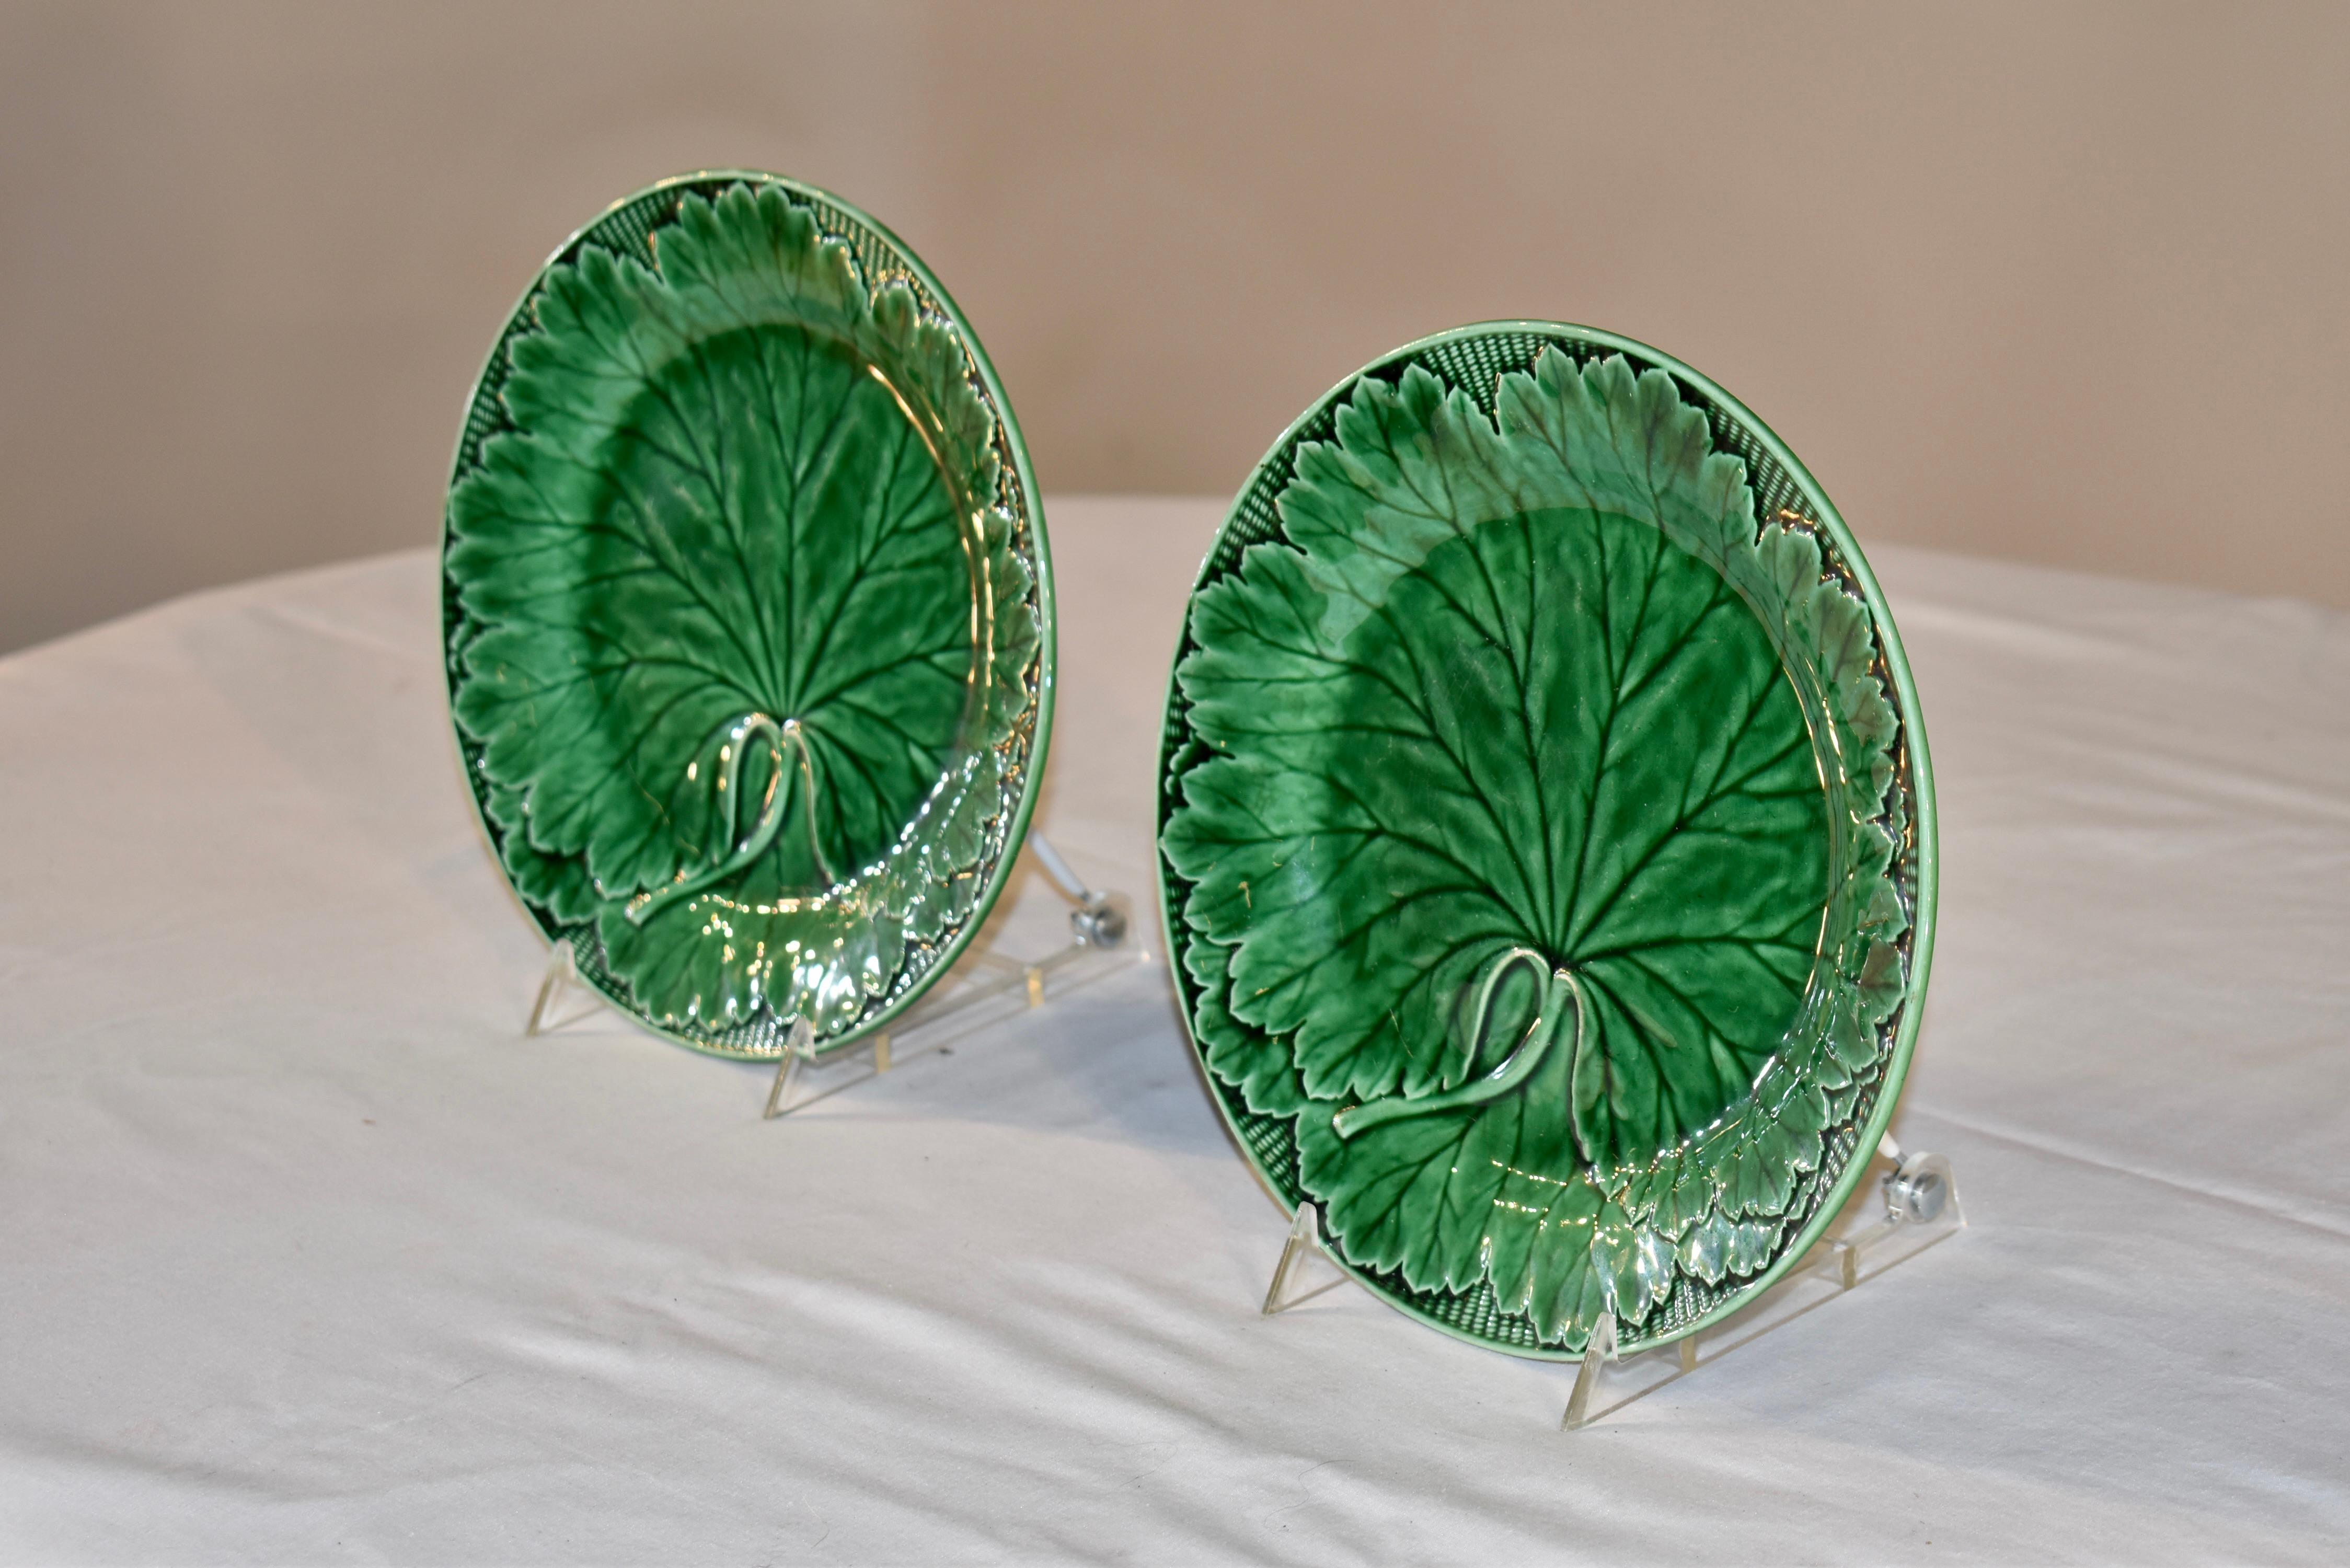 Pair of 19th century Wedgwood majolica plates in a rich shade of green.  the molds are crisp and have loads of detail in the leaves and surrounding basketweave design.  The pieces have the impressed mark WEDGWOOD on the backs.  